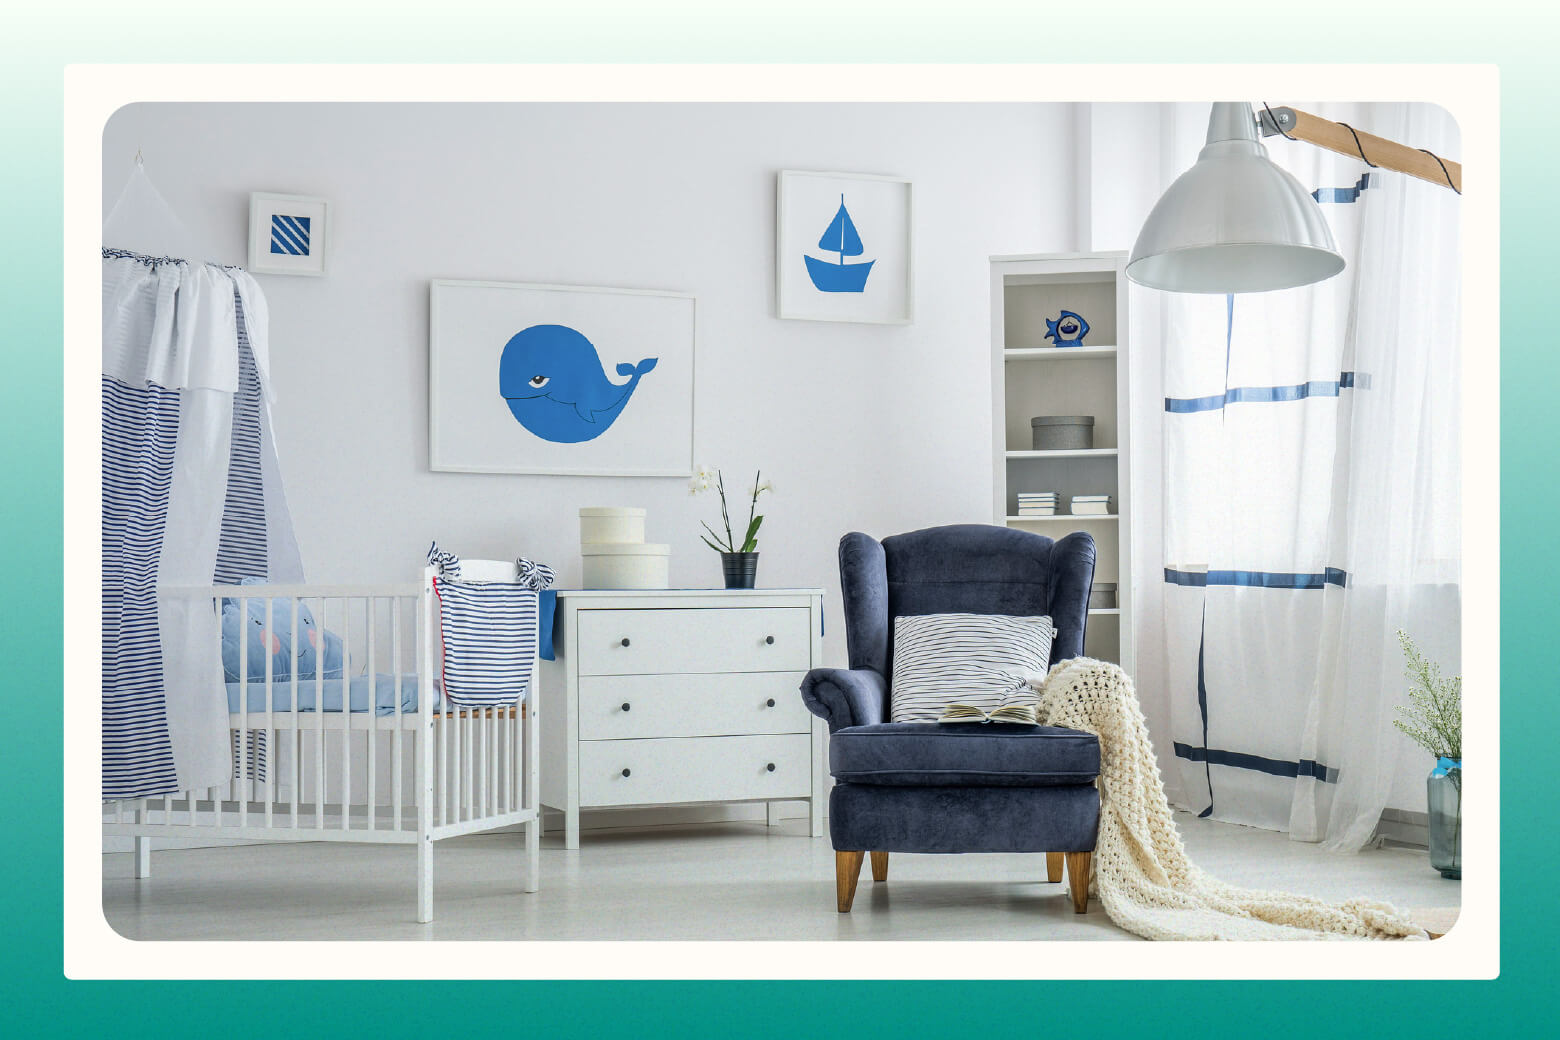 Mostly white baby nursery with accents of blue and an ocean theme